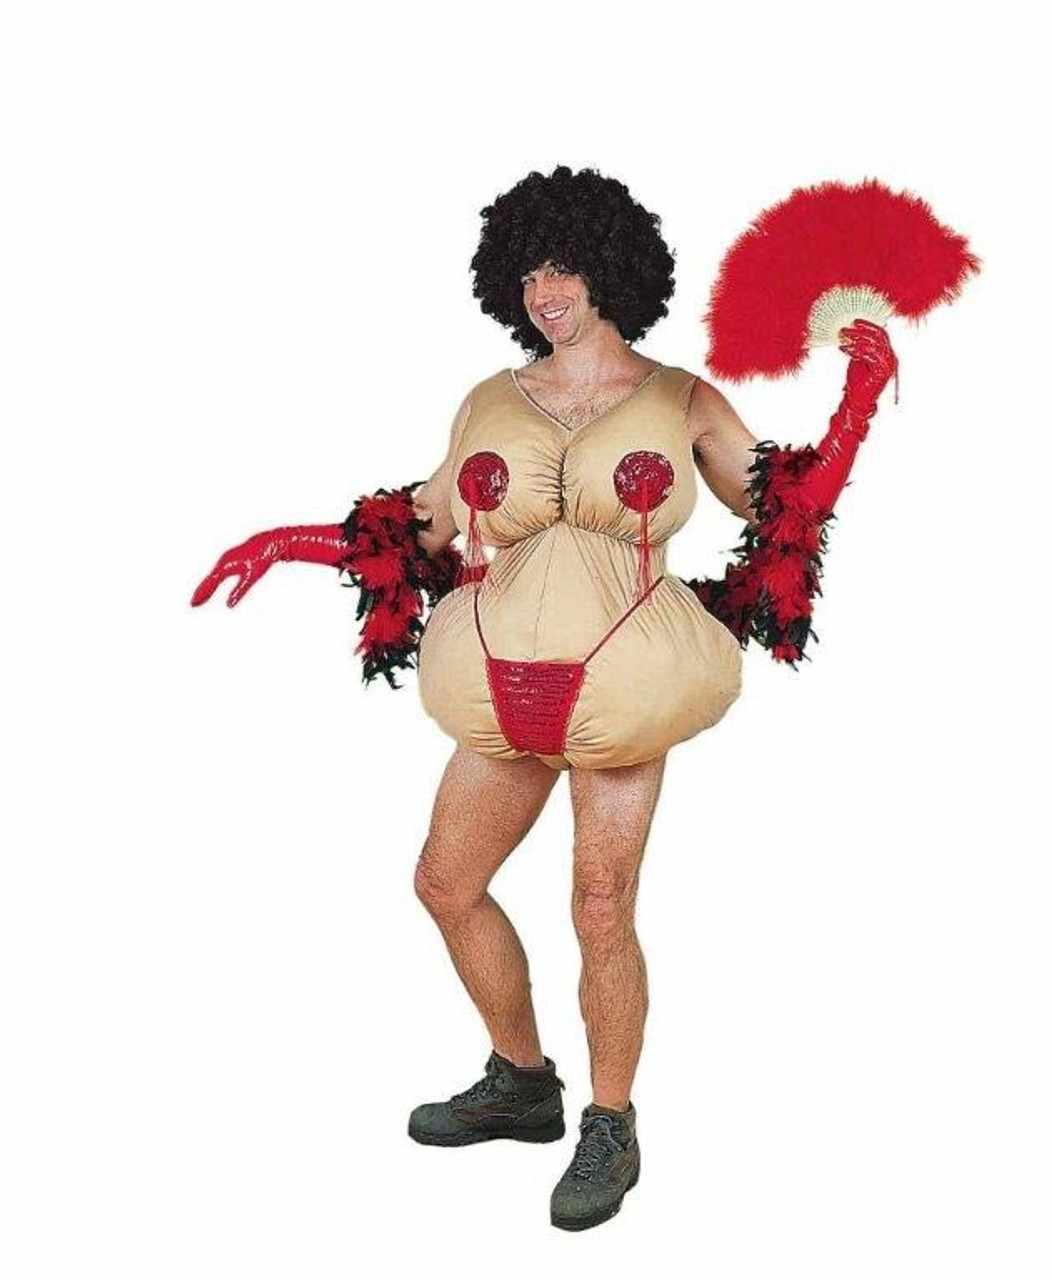 bill elwell recommends stripper halloween costume pic